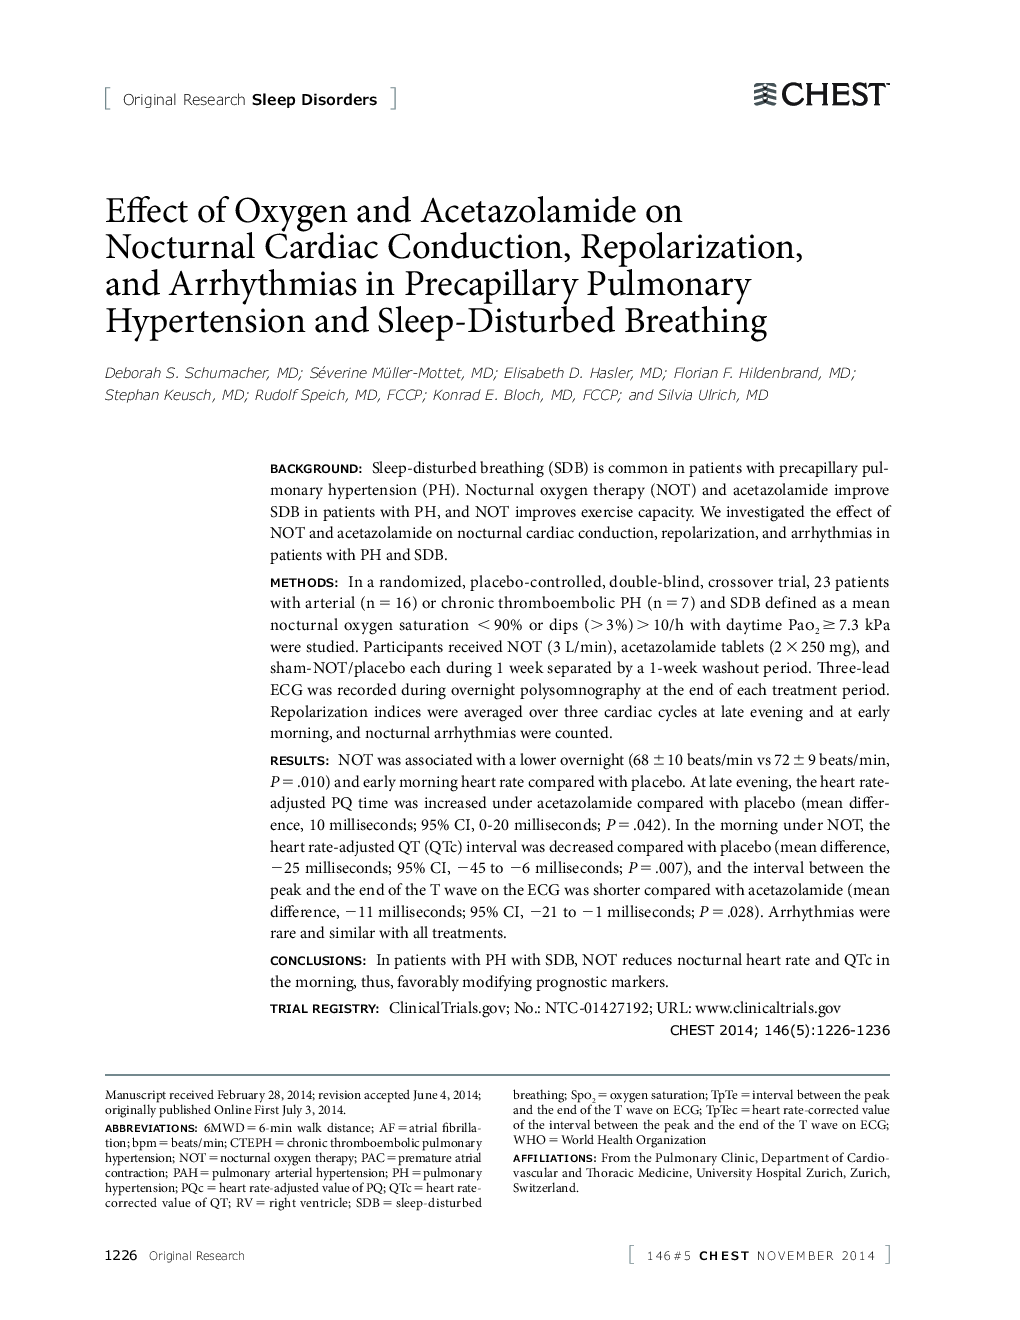 Effect of Oxygen and Acetazolamide on Nocturnal Cardiac Conduction, Repolarization, and Arrhythmias in Precapillary Pulmonary Hypertension and Sleep-Disturbed Breathing